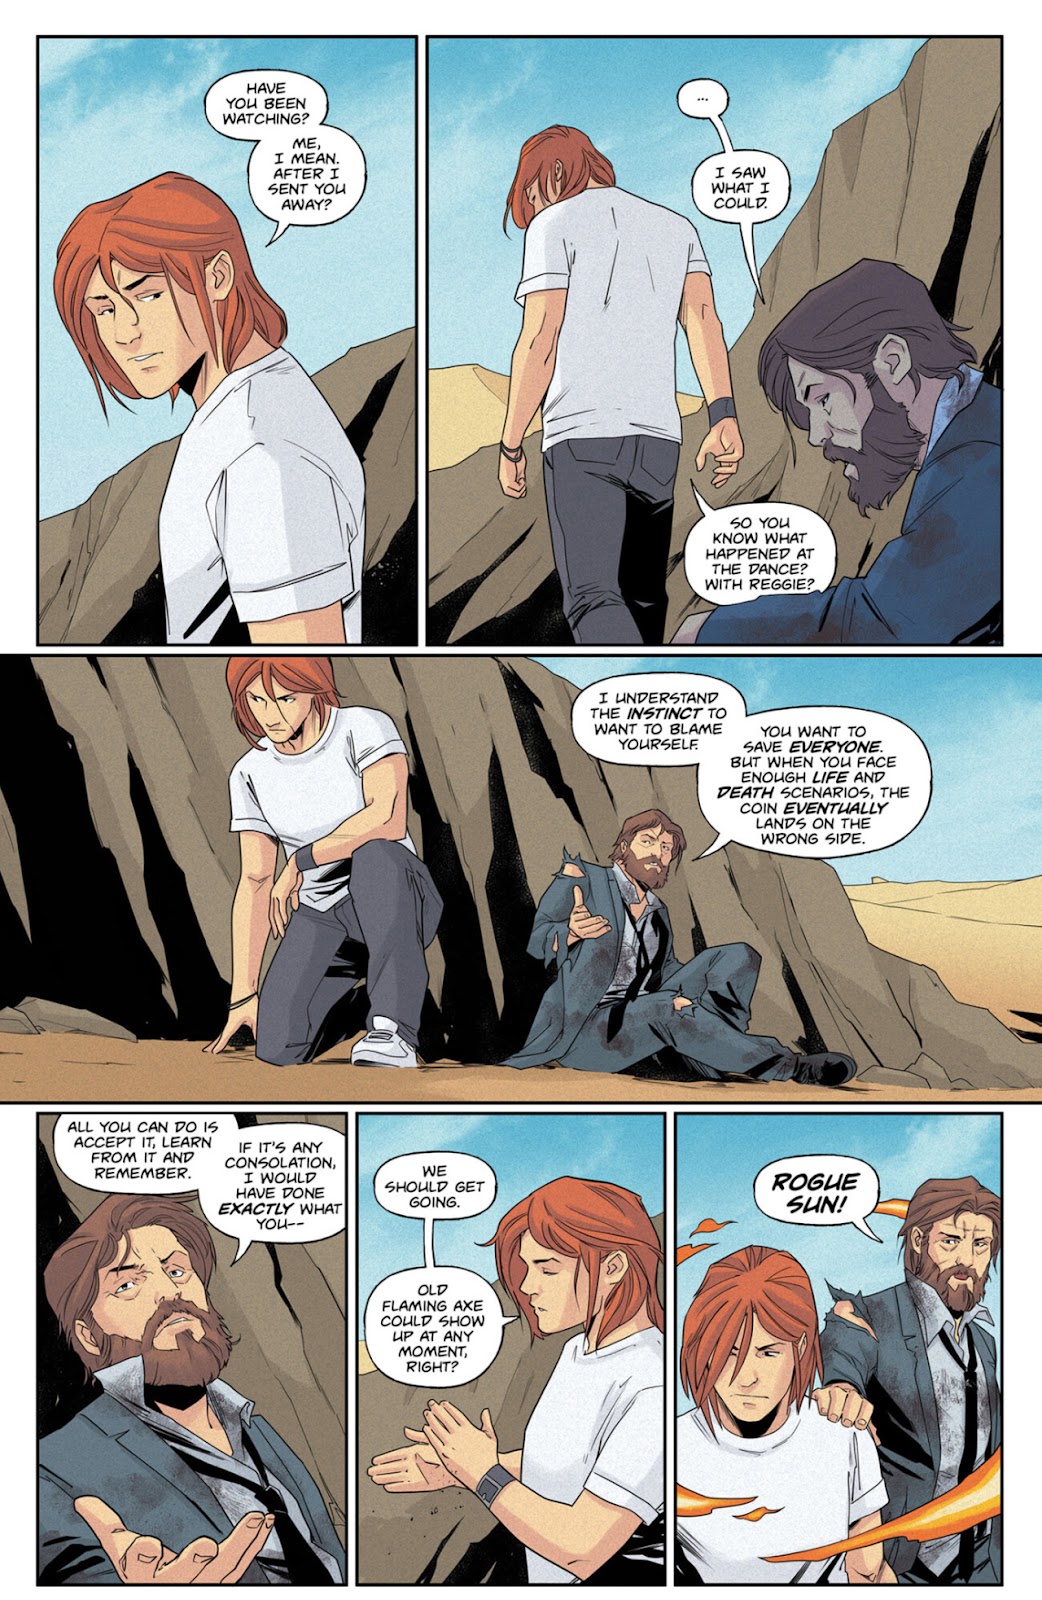 Rogue Sun issue 14 - Page 18